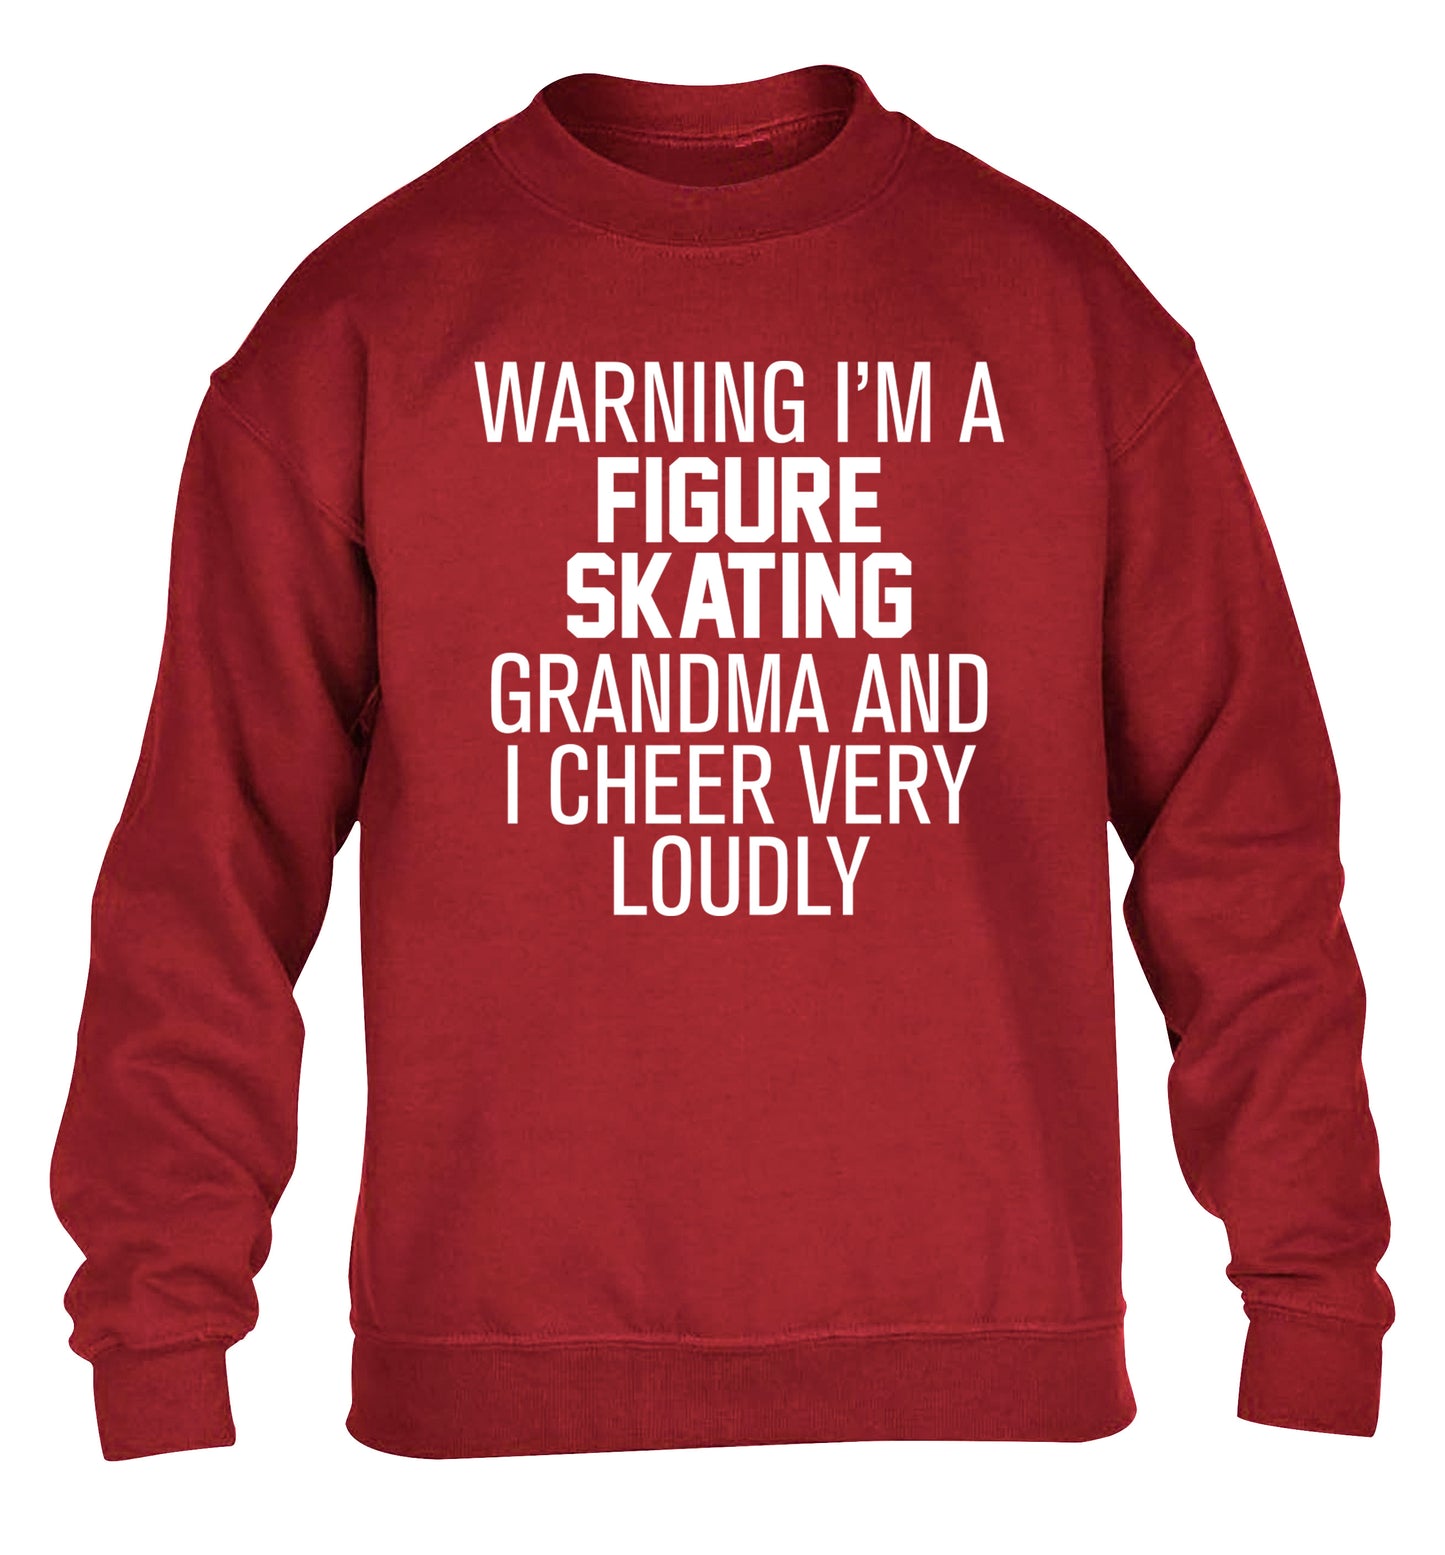 Warning I'm a figure skating grandma and I cheer very loudly children's grey sweater 12-14 Years